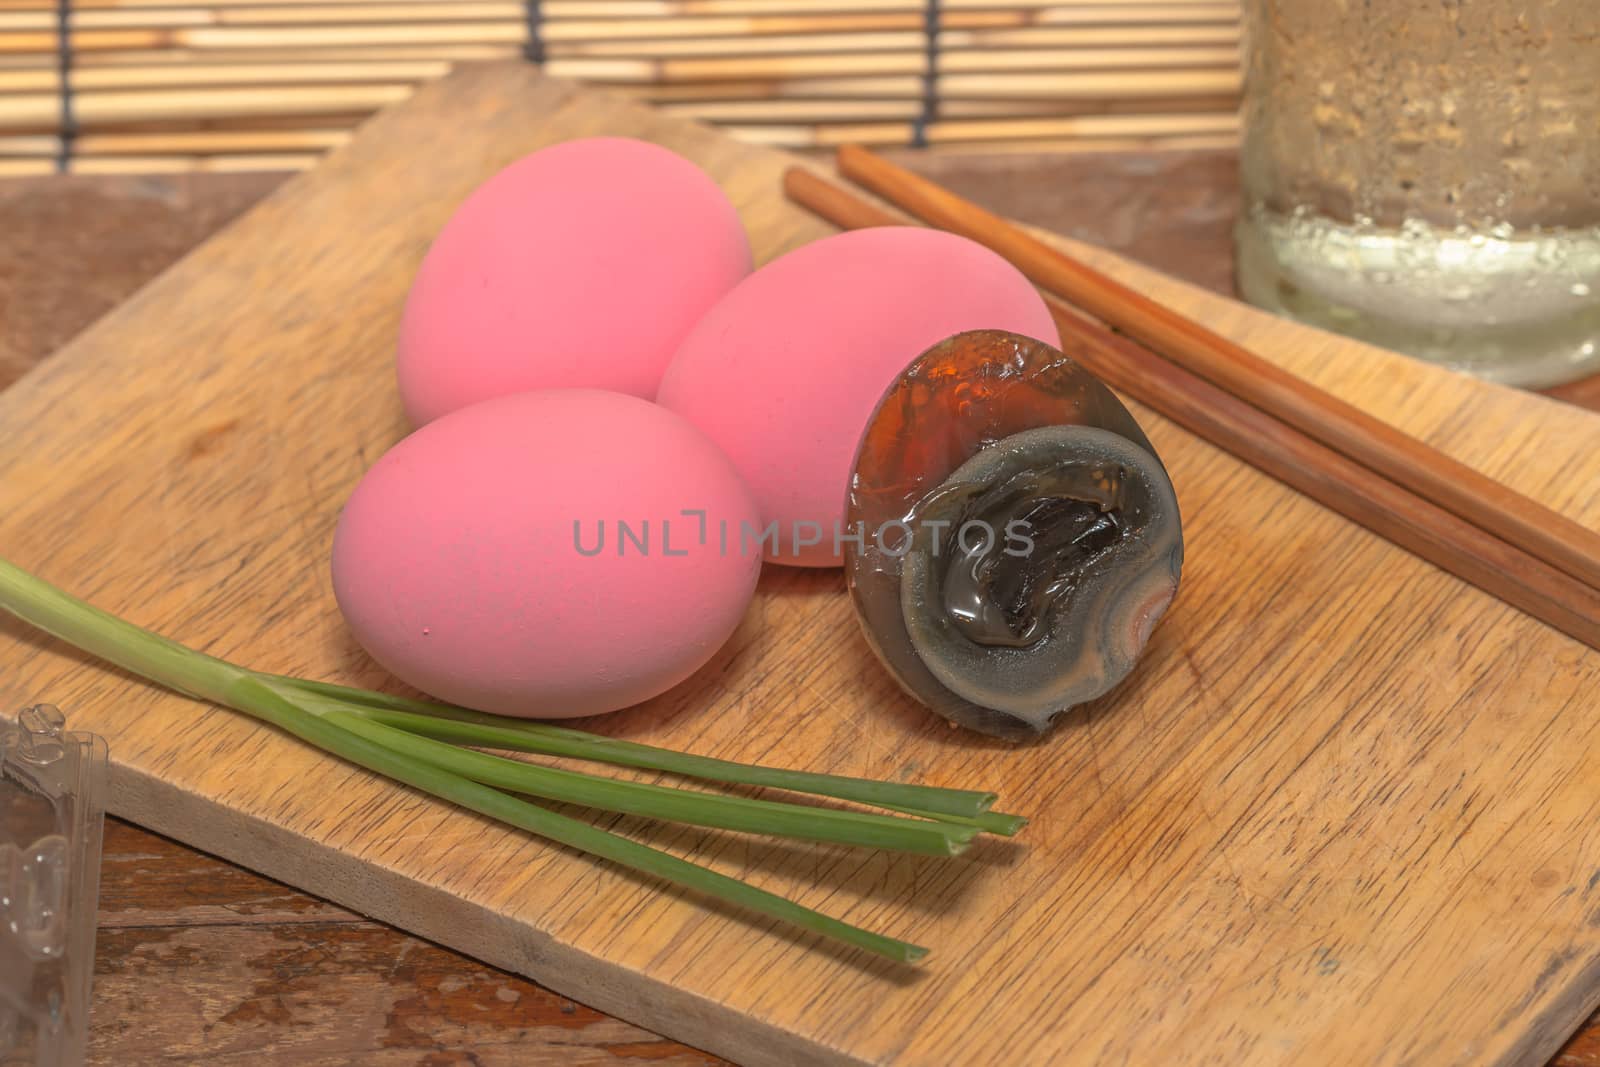 preserved eggs are preserved in a special process, giving the eggs a distinct look and taste. Also known as Century eggs or thousand-year eggs.